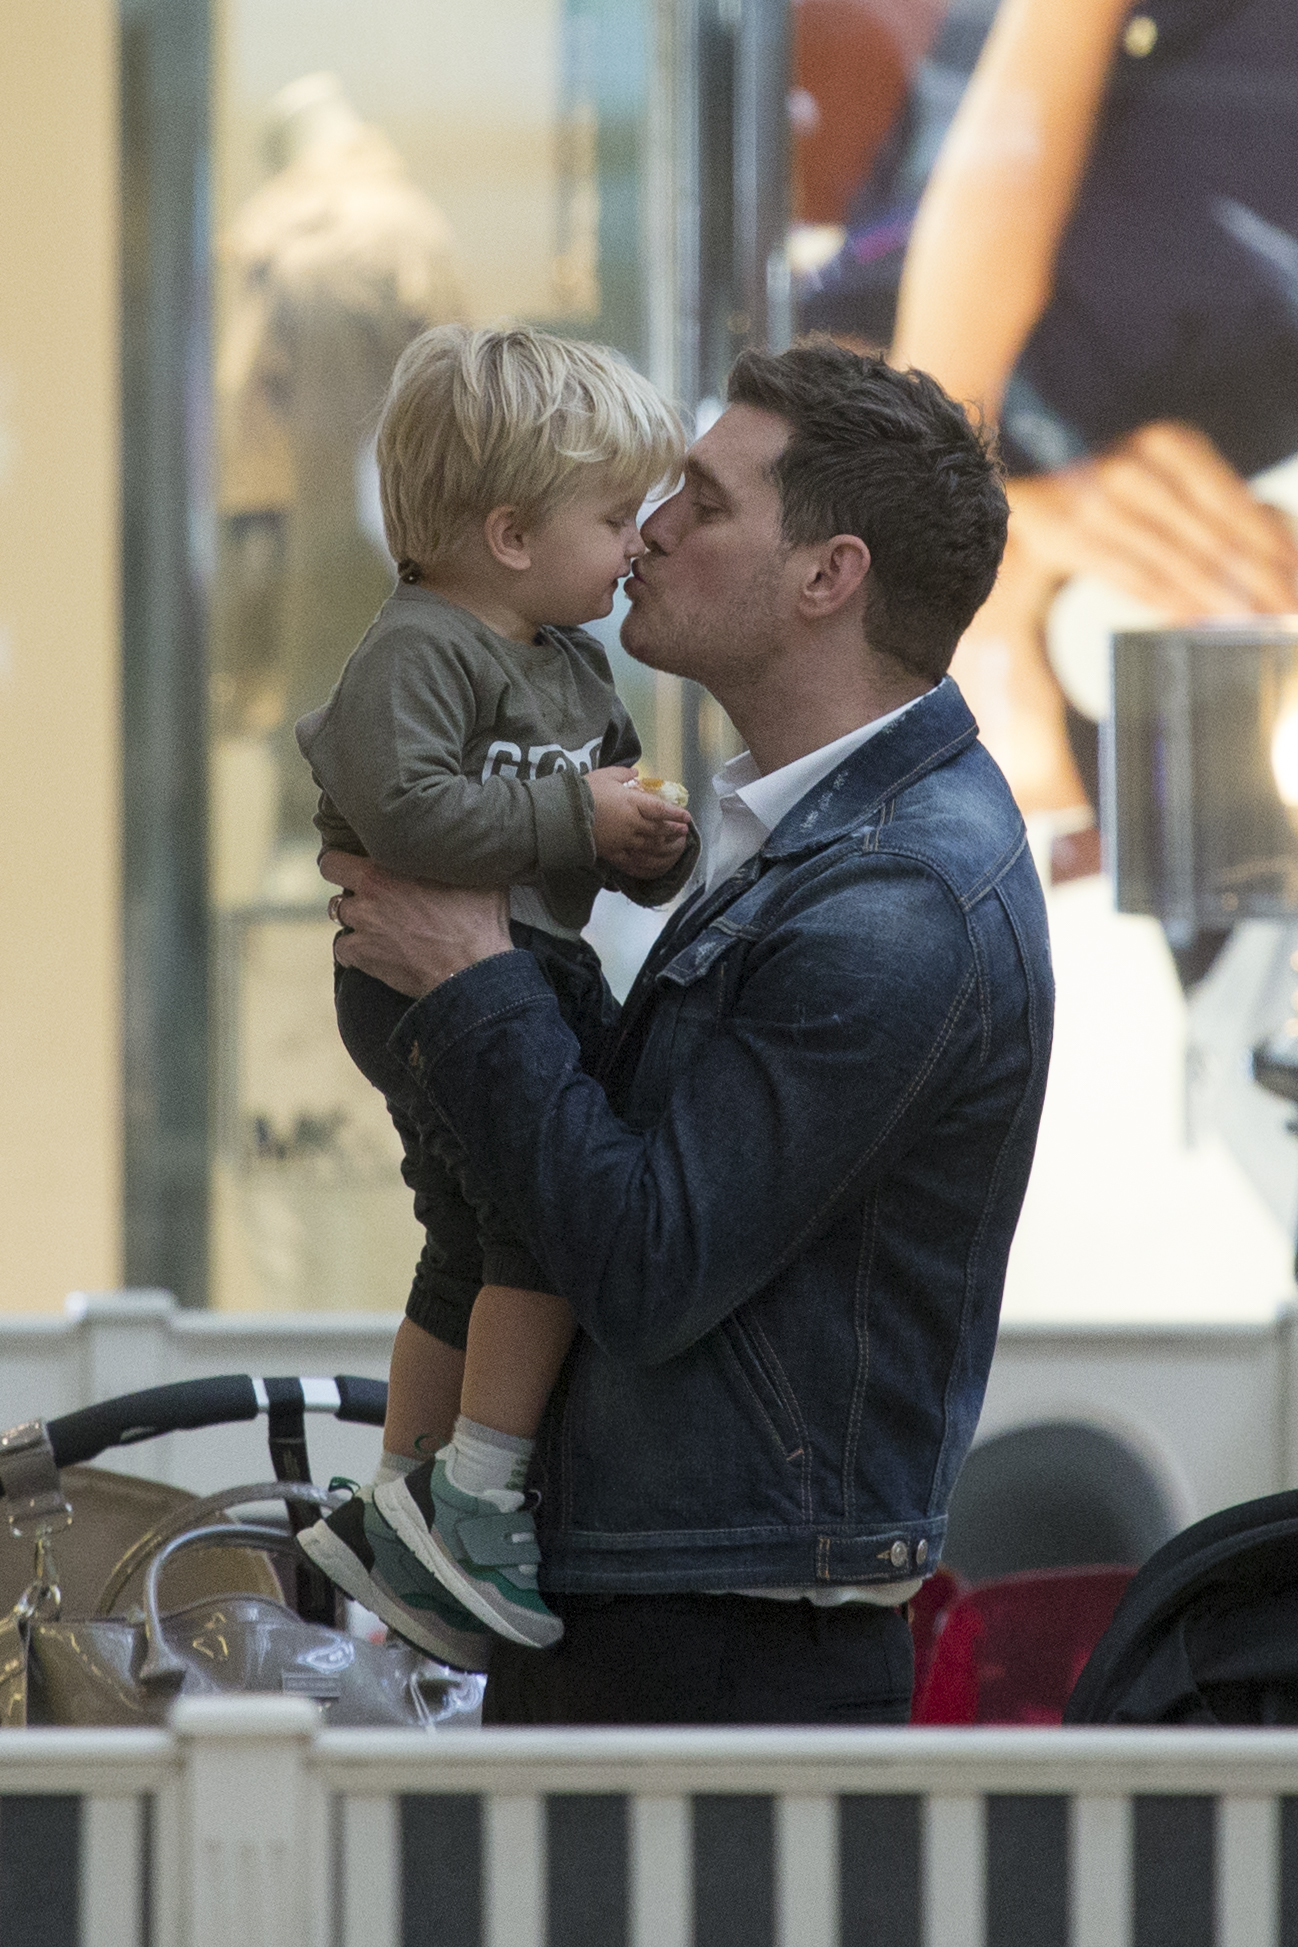 Noah and Michael Bublé spotted in Madrid, Spain on April 28, 2015 | Source: Getty Images